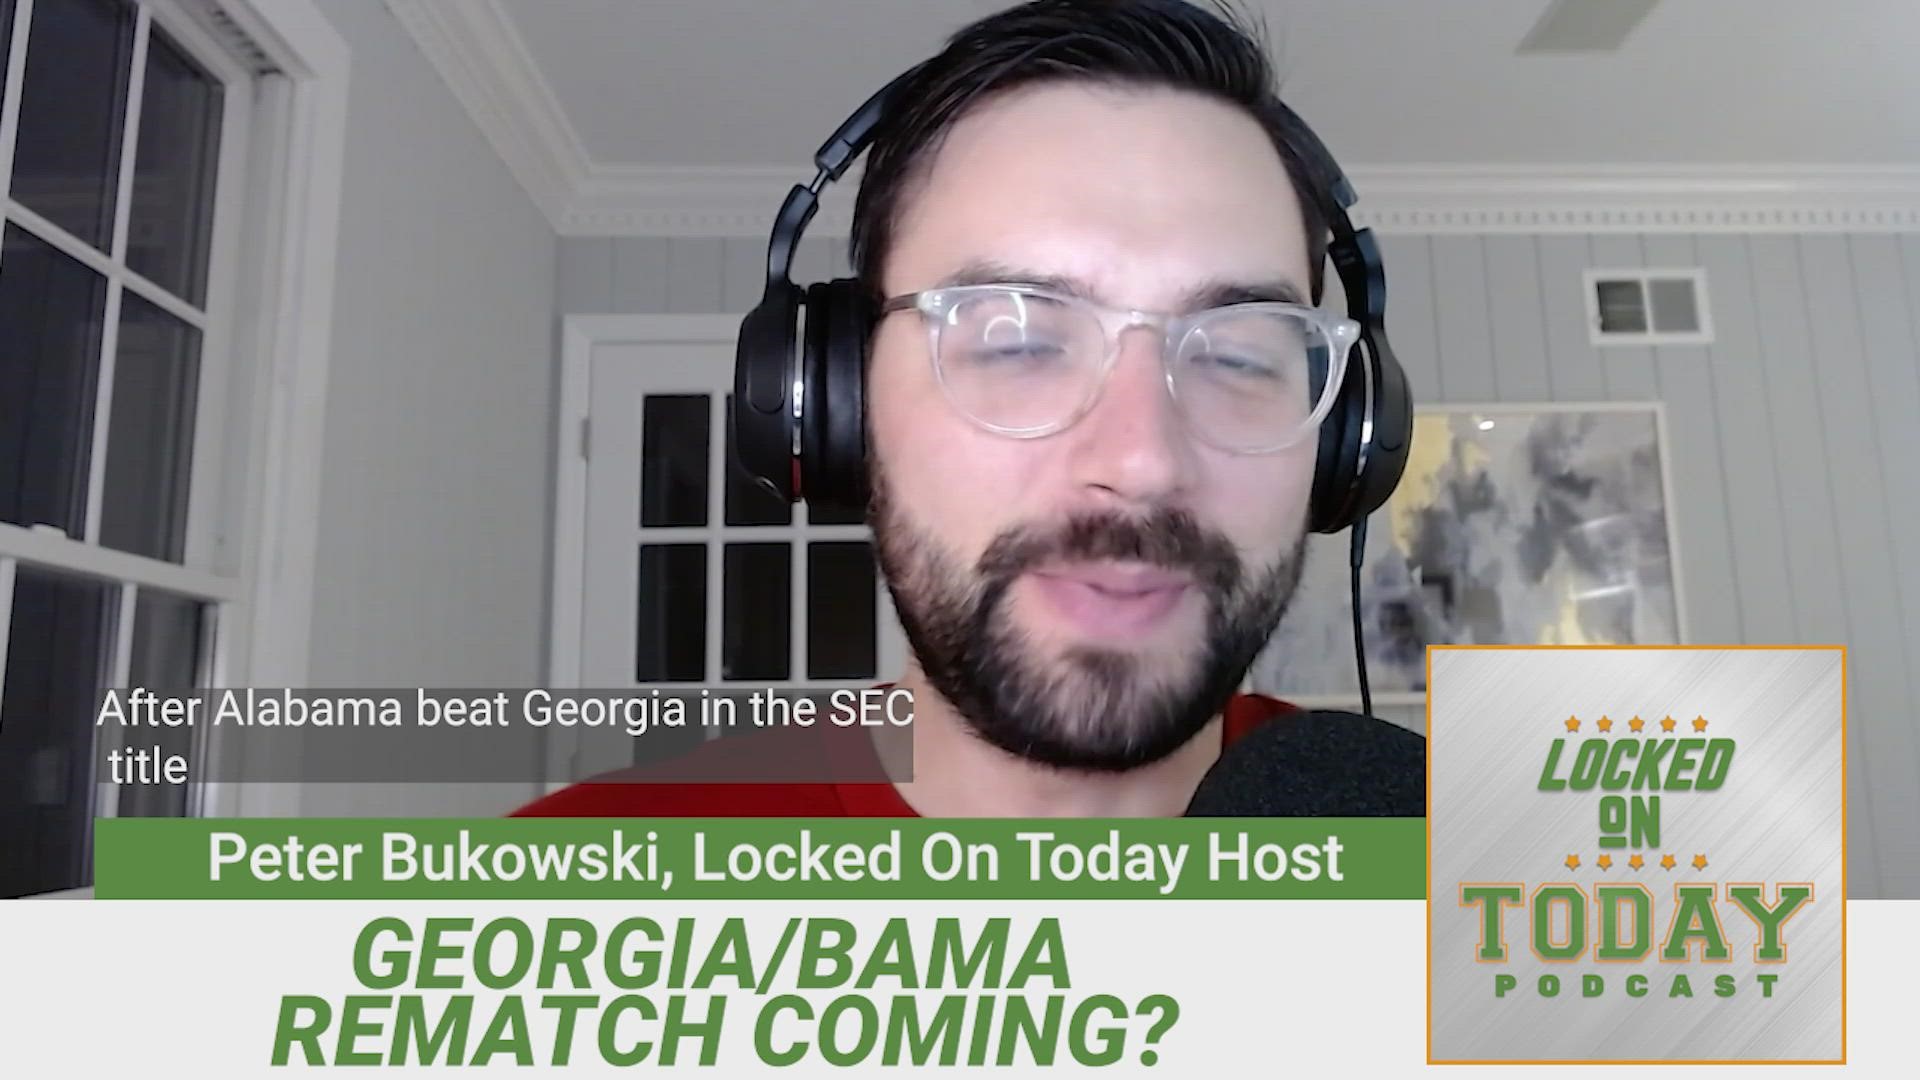 Chris Gordy of the Locked On SEC podcast joins Peter Bukowski on Locked On Today to give his thoughts on the Georgia/Alabama game and the College Football Playoff